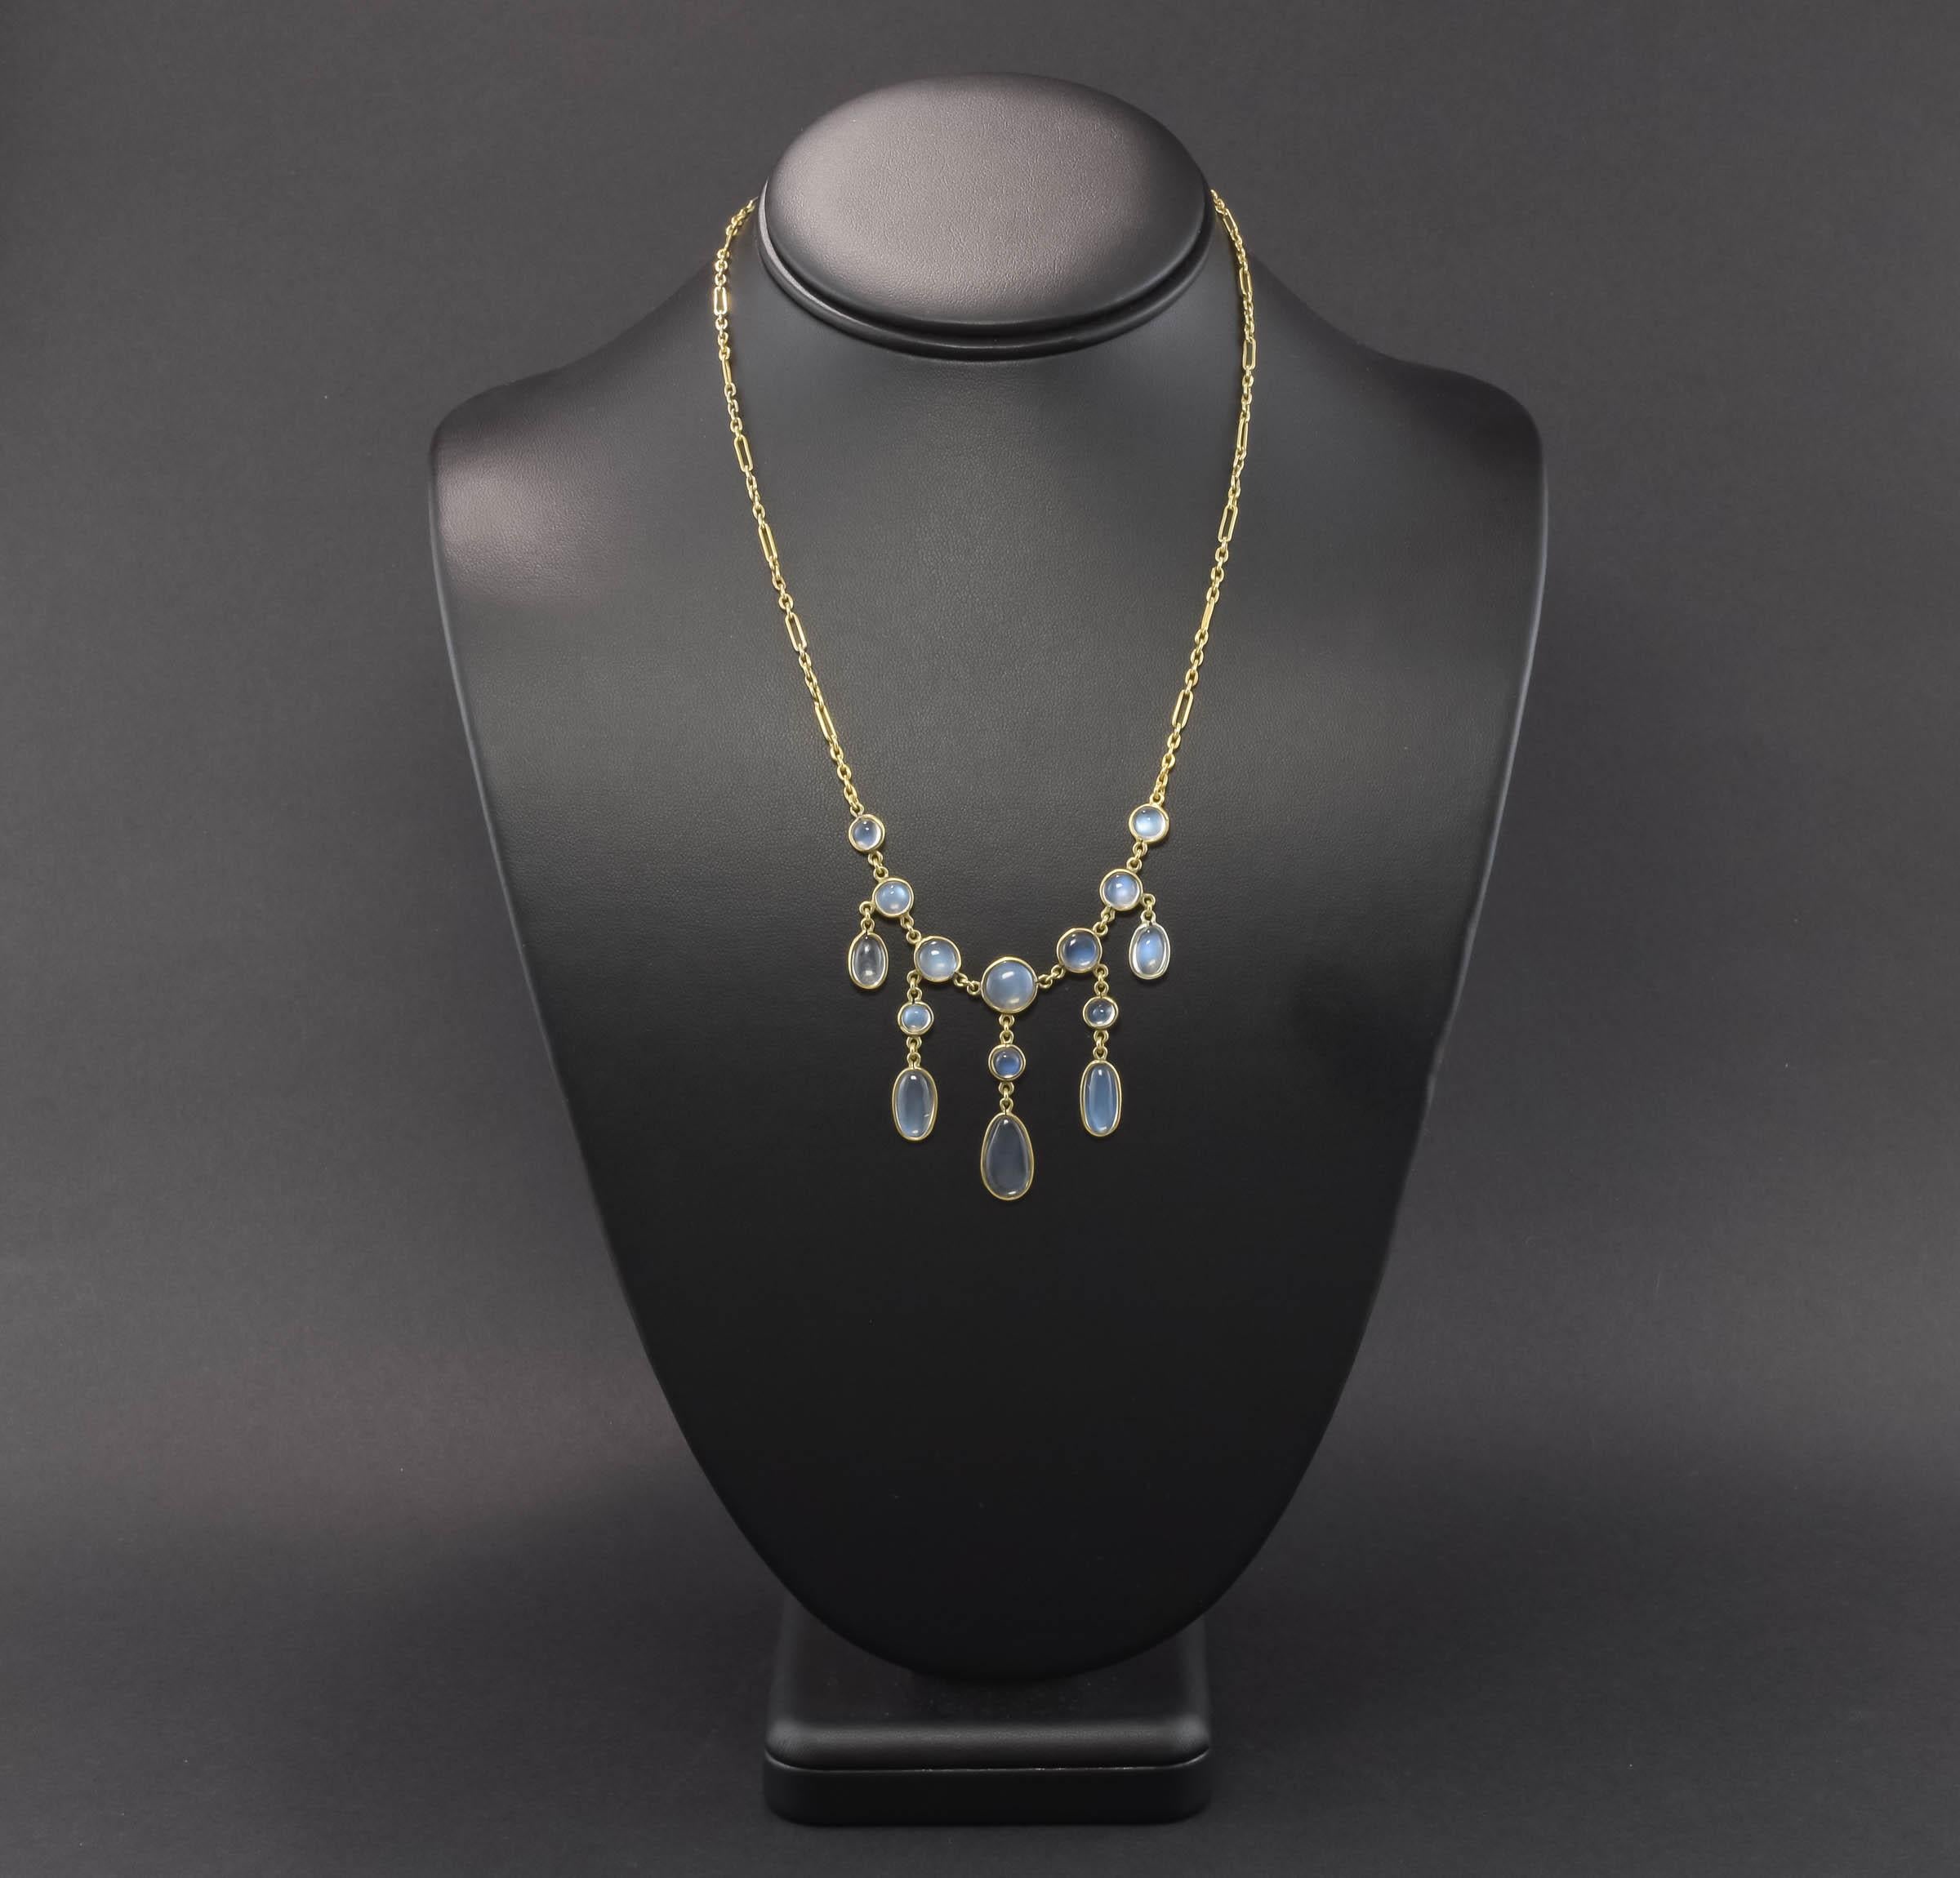 Offered is a graceful late Victorian to early Edwardian period Moonstone Drop or Fringe Necklace.  Fifteen round and oval cabochon cut Moonstones are suspended from a beautiful 15K gold fancy link chain, for an estimated total carat weight of 15.09